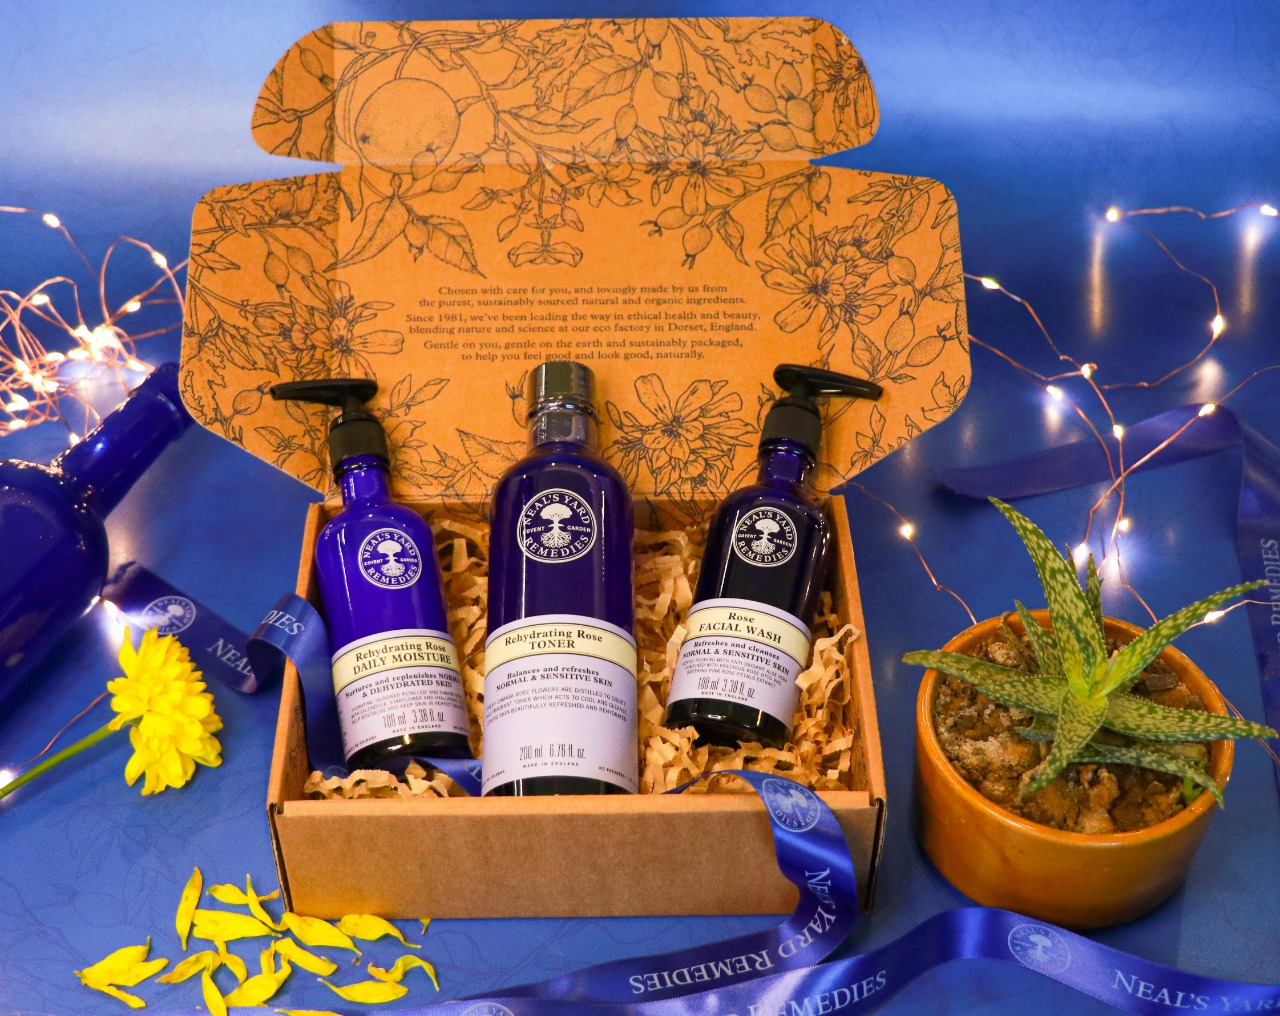 Neal's Yard Remedies might help you make Diwali mindful and memorable.